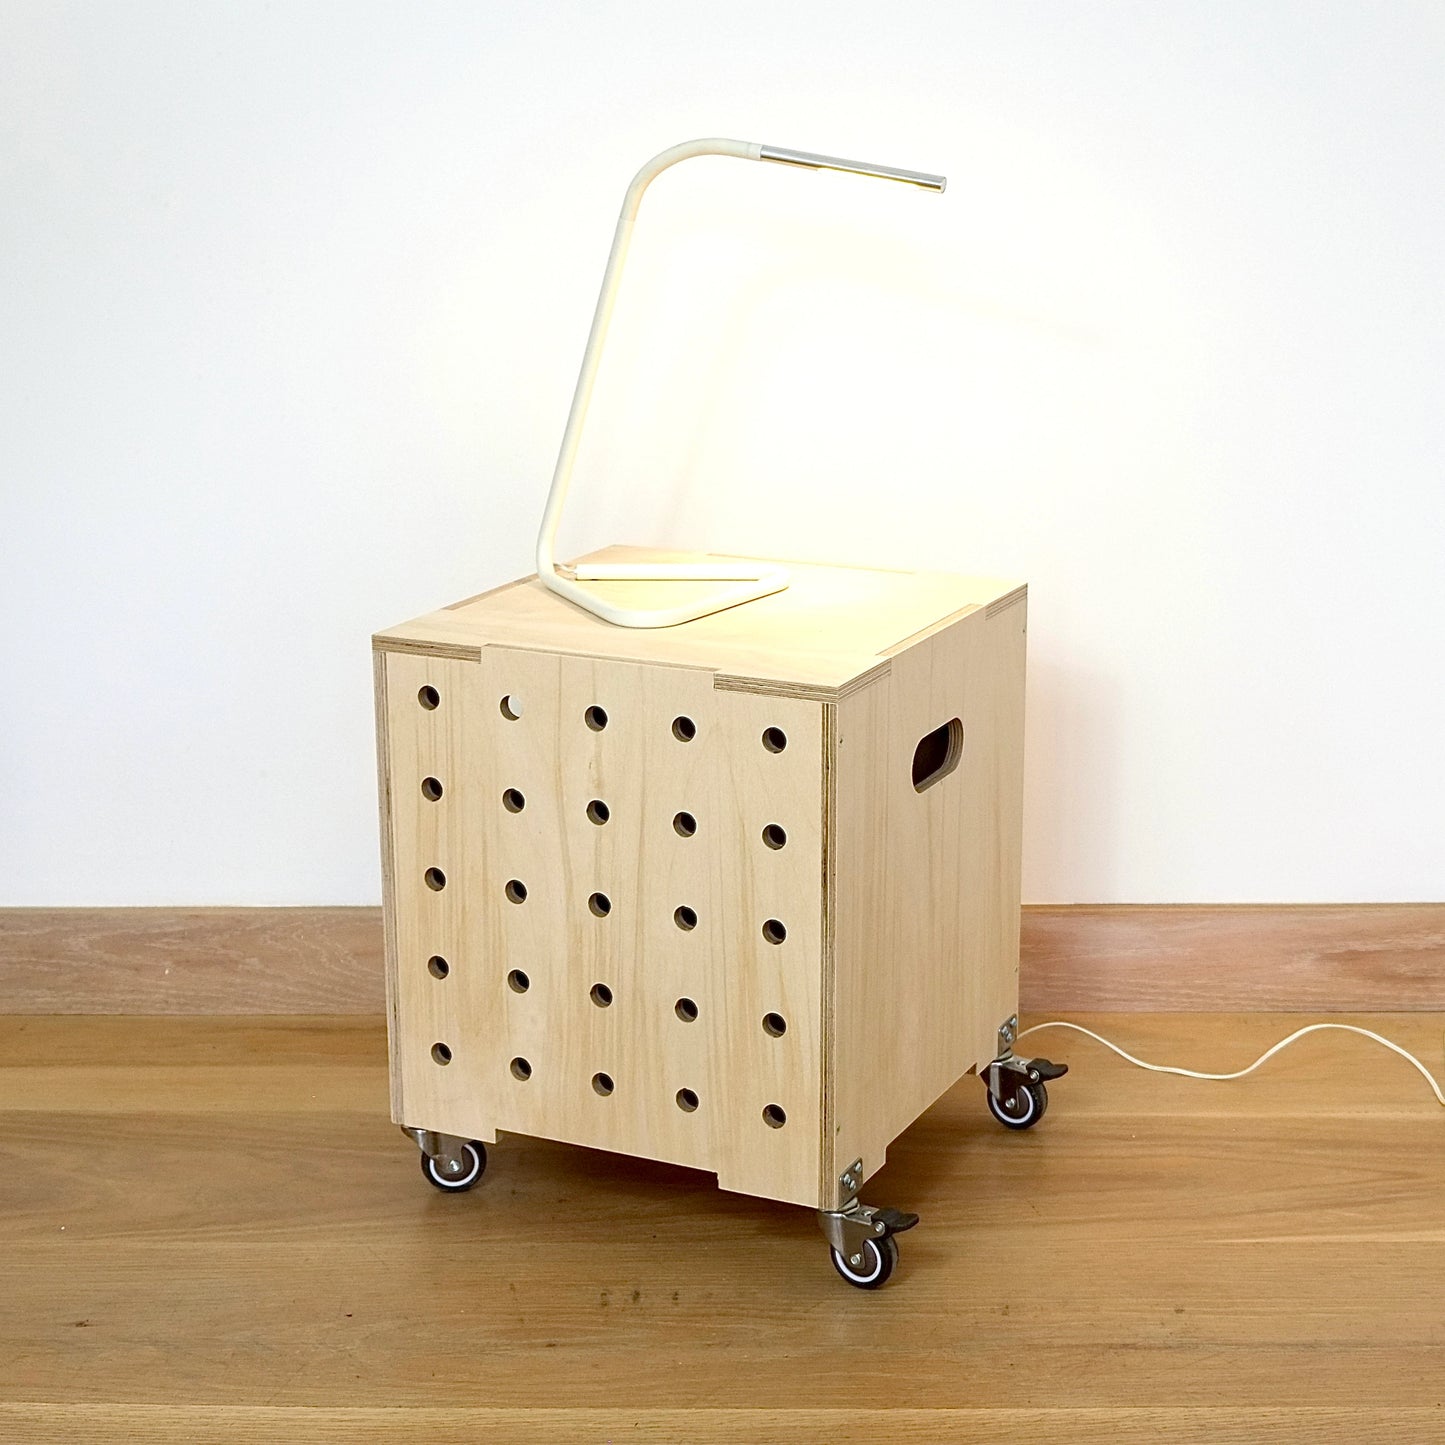 Contemporary birch plywood square box used as a side table with white lamp. front has 5 rows of vertical drilled holes, top has lid & bottom features castors against a white wall on a wooden floor